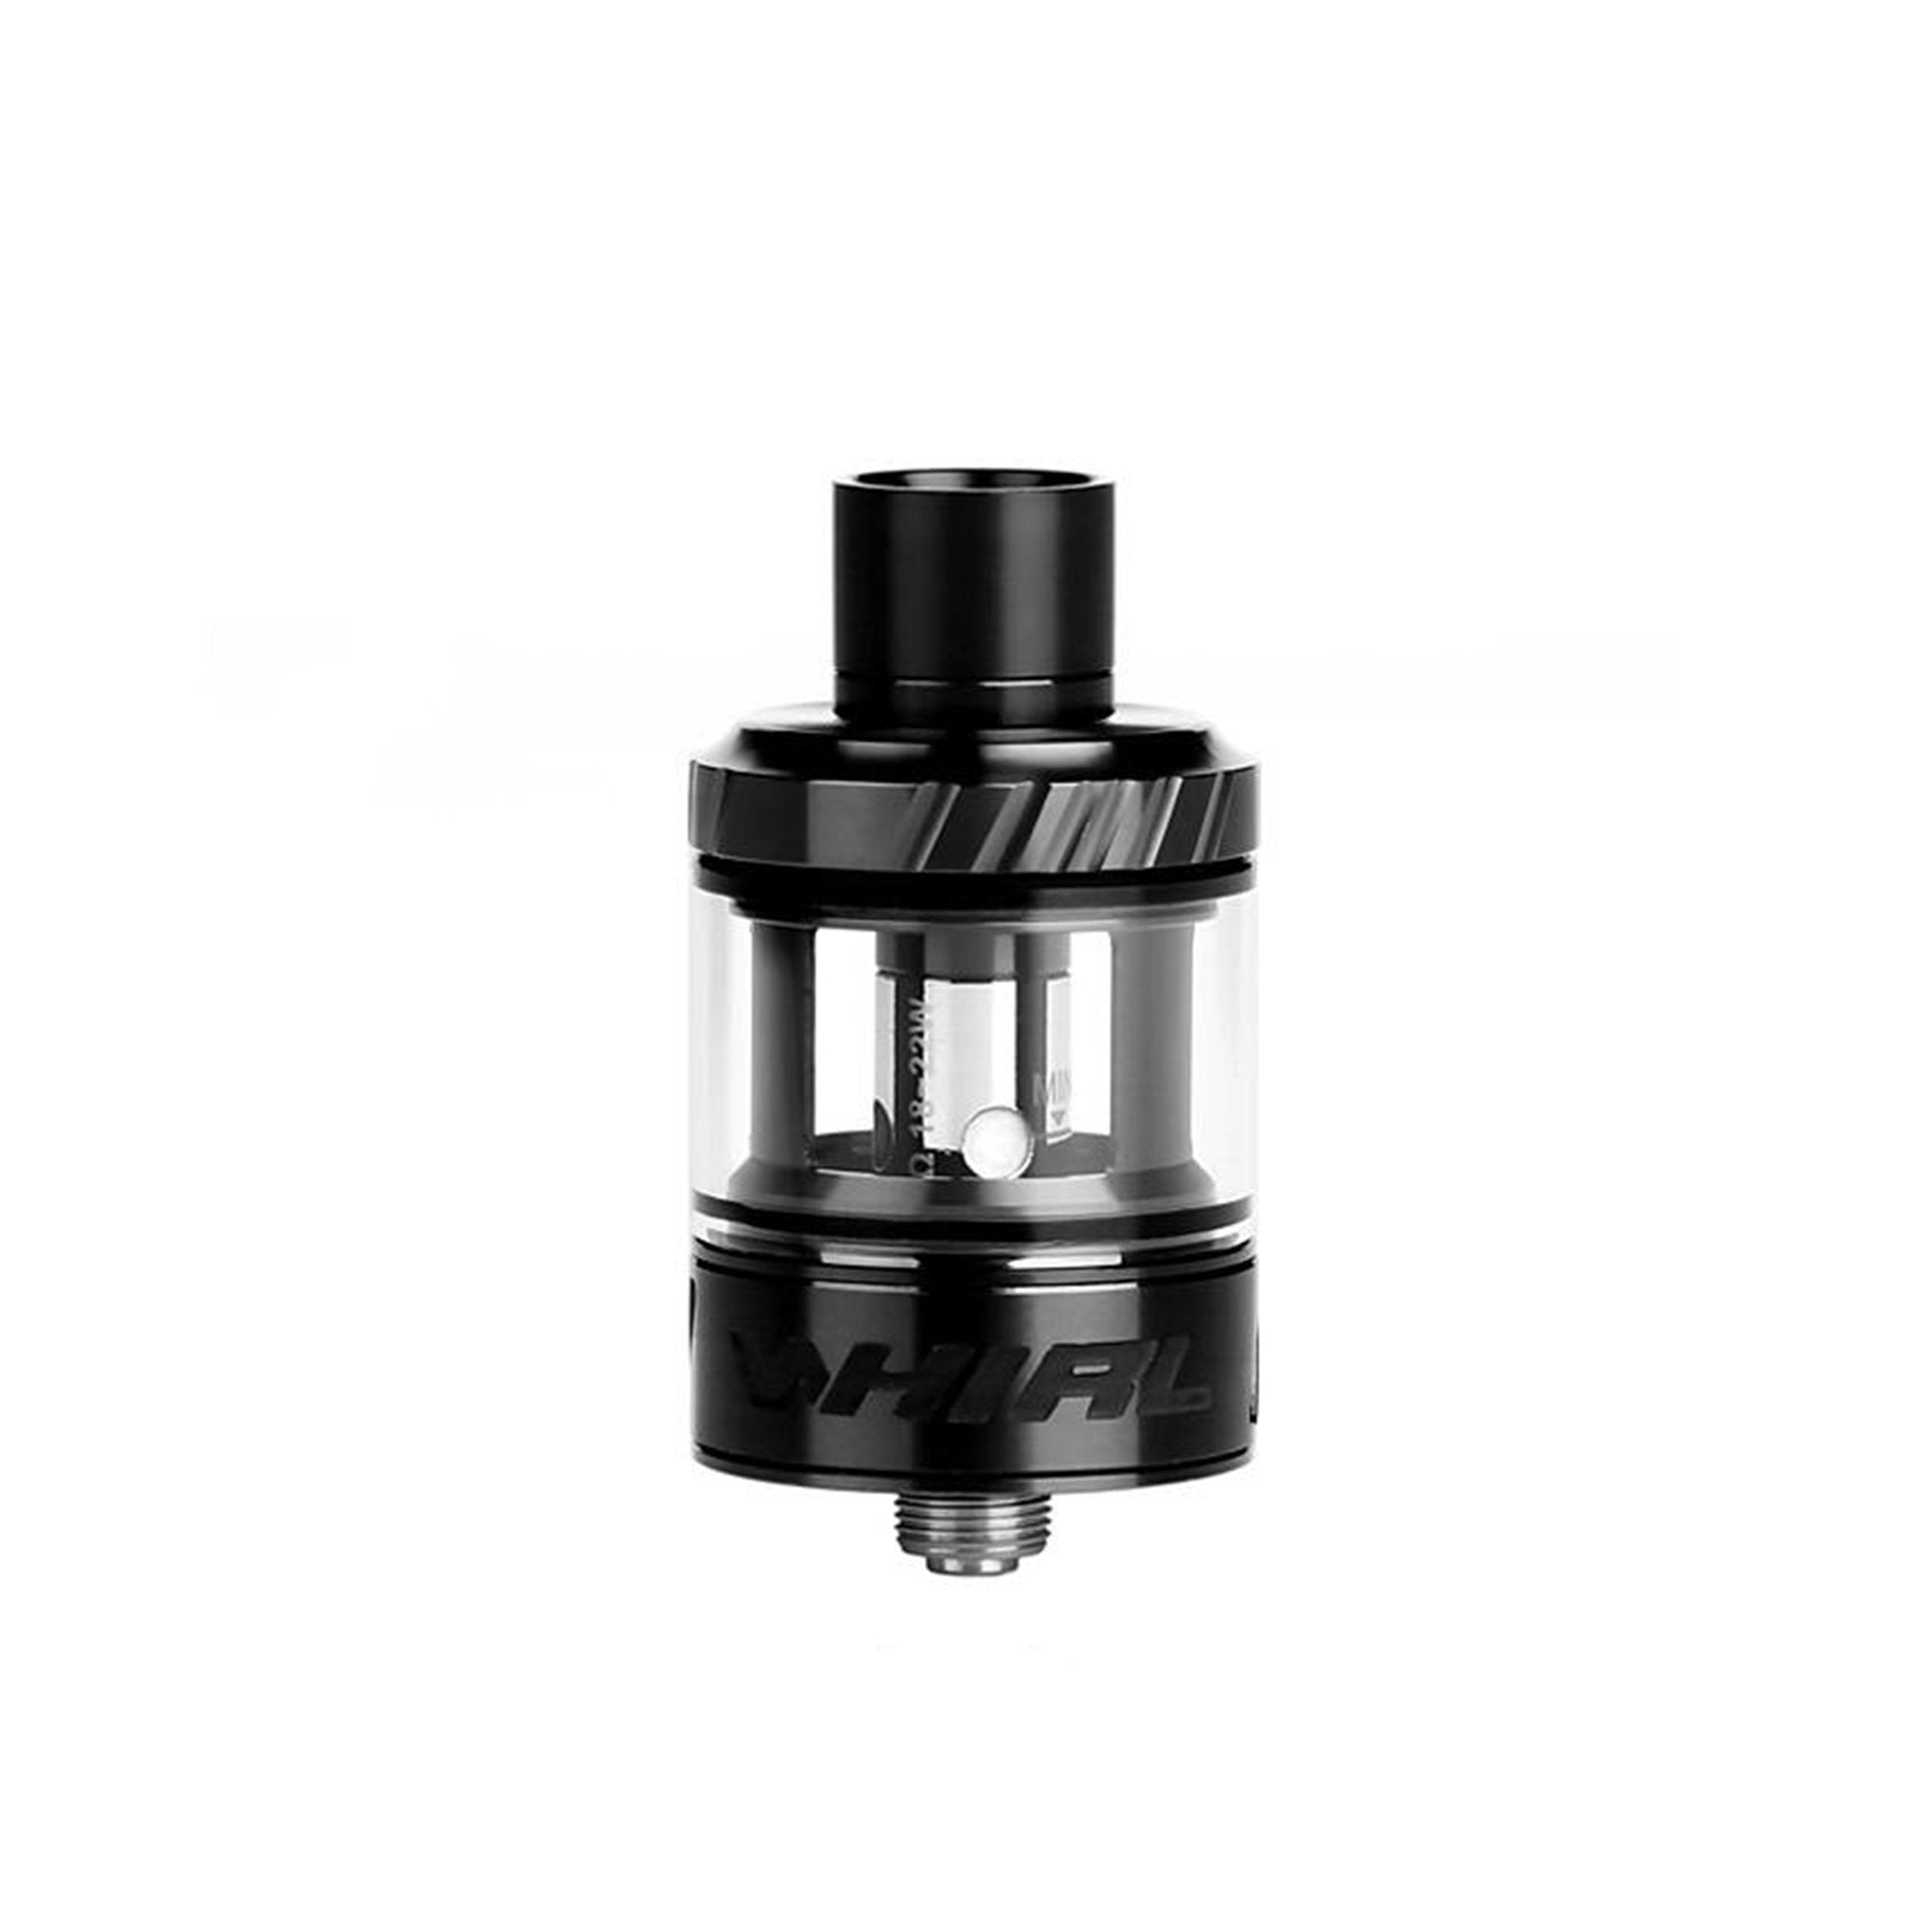 Uwell Whirl 2 Tank | Uwell WHIRL 2 Tank has a 3.5mL | wolfvapes - Wolfvapes.co.uk-Black